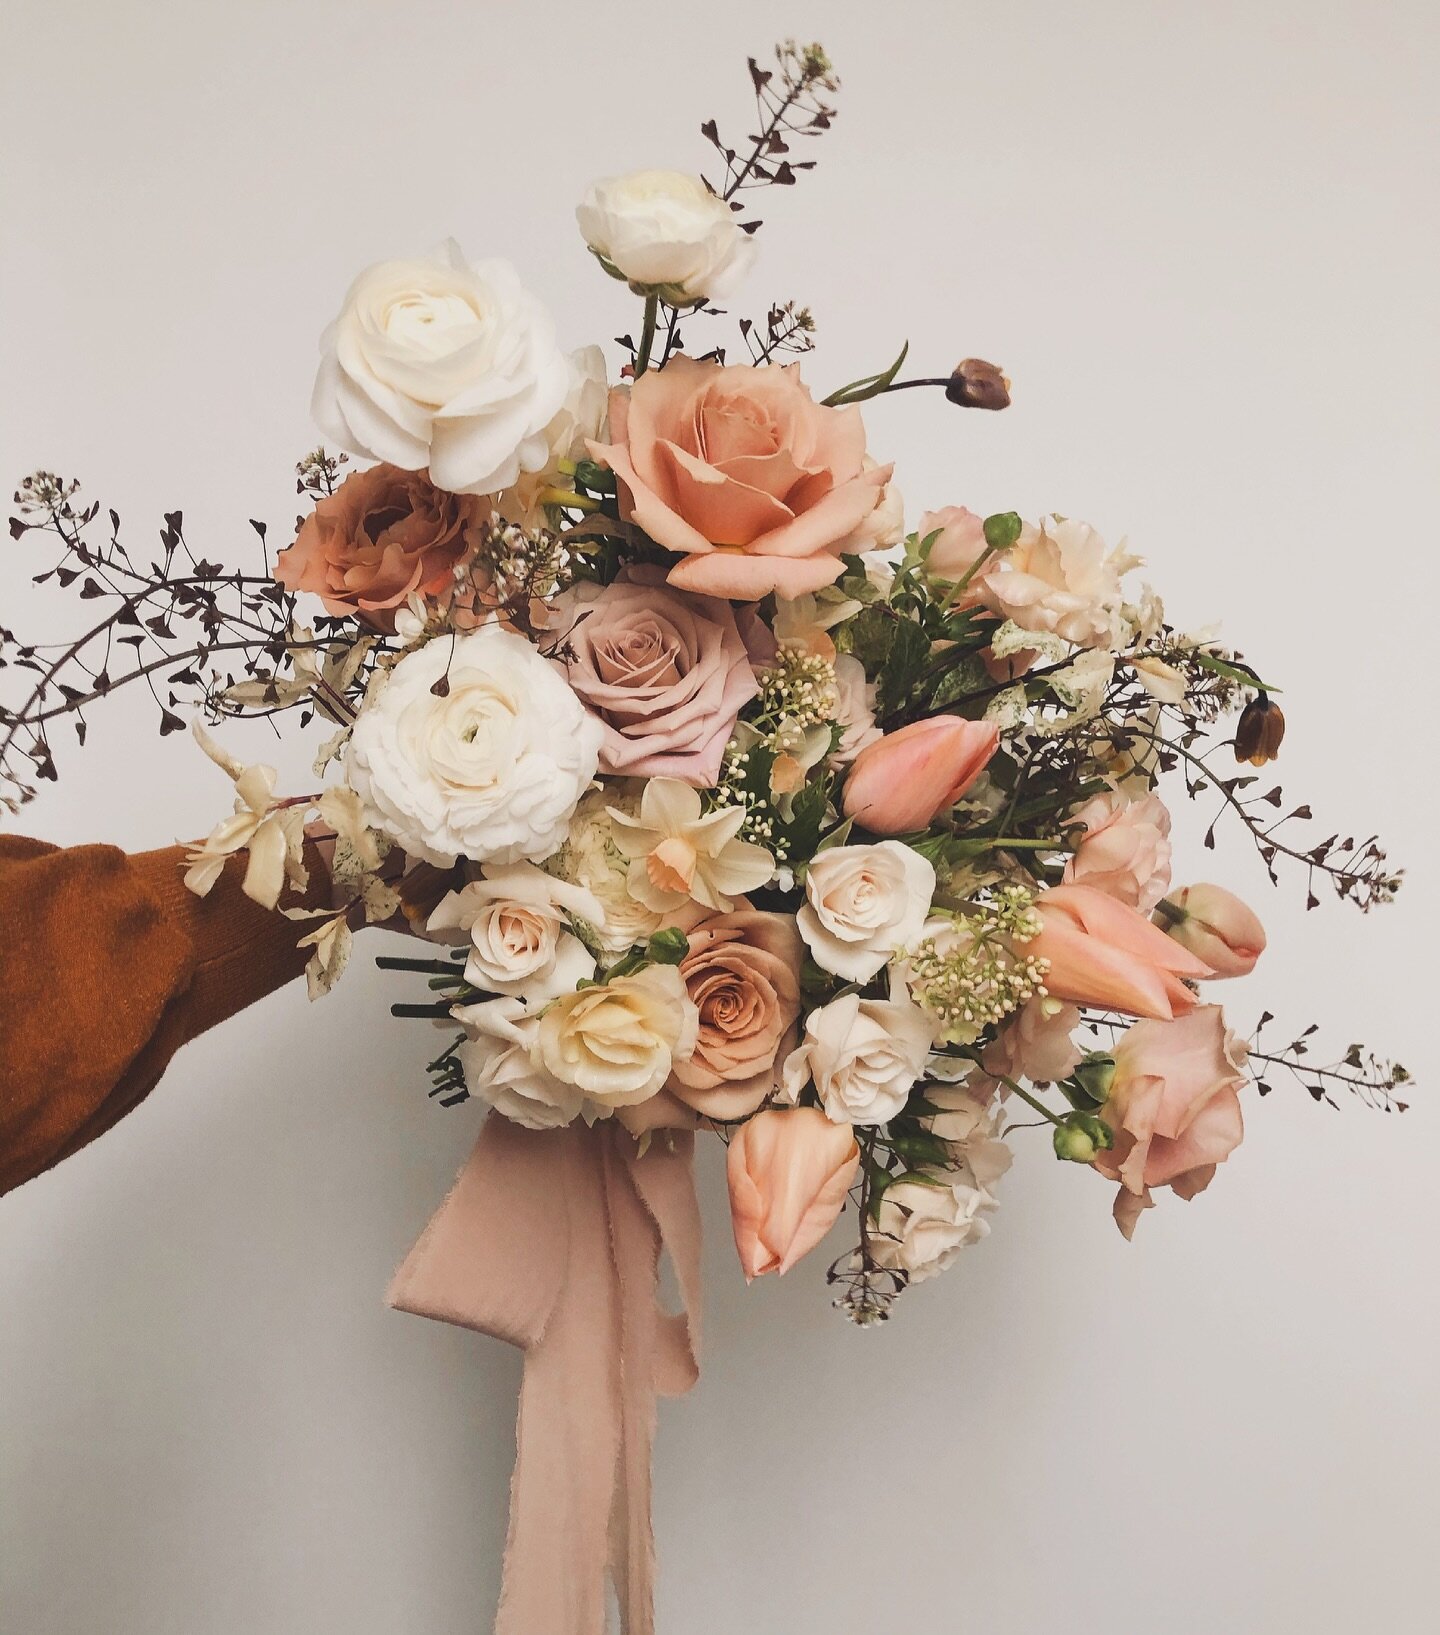 This spring bridal bouquet holds a cherished spot in my heart. It marked the first wedding I had the joy of creating post-Covid. I&rsquo;ll never forget the sheer delight I felt as I immersed myself in blooms after such a long time.